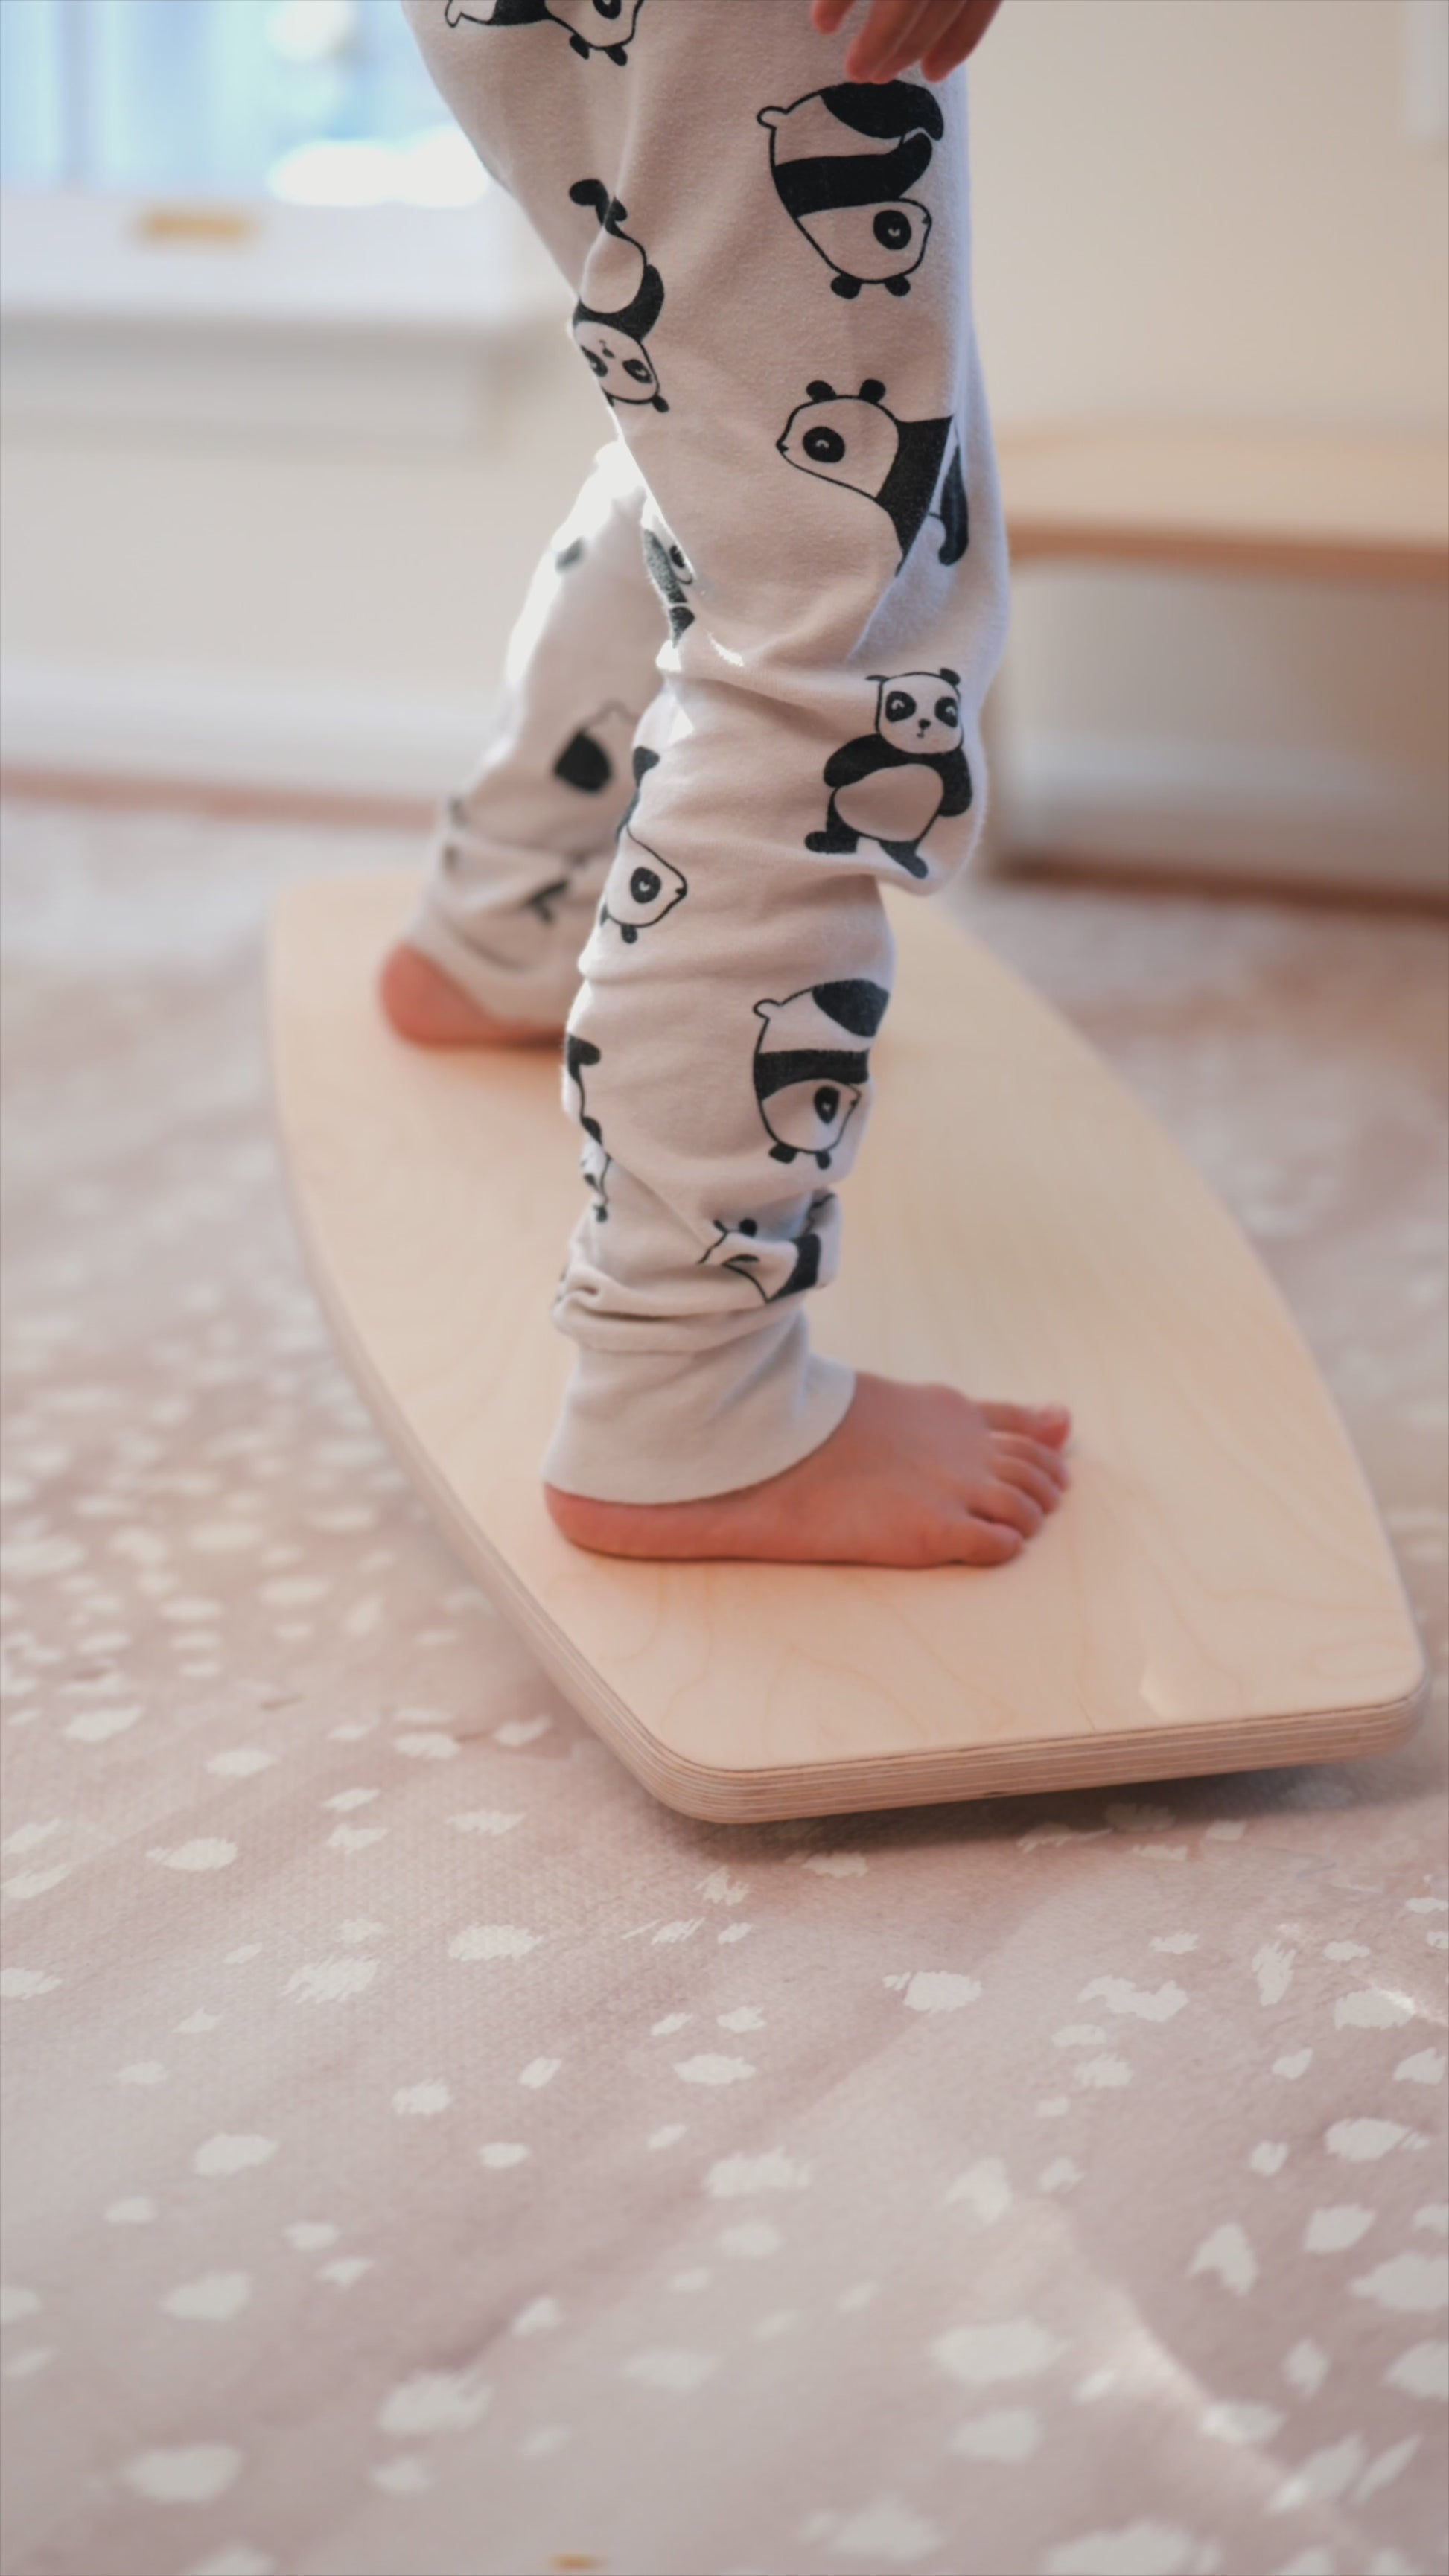 Child using a wooden balance board that rocks back and forth